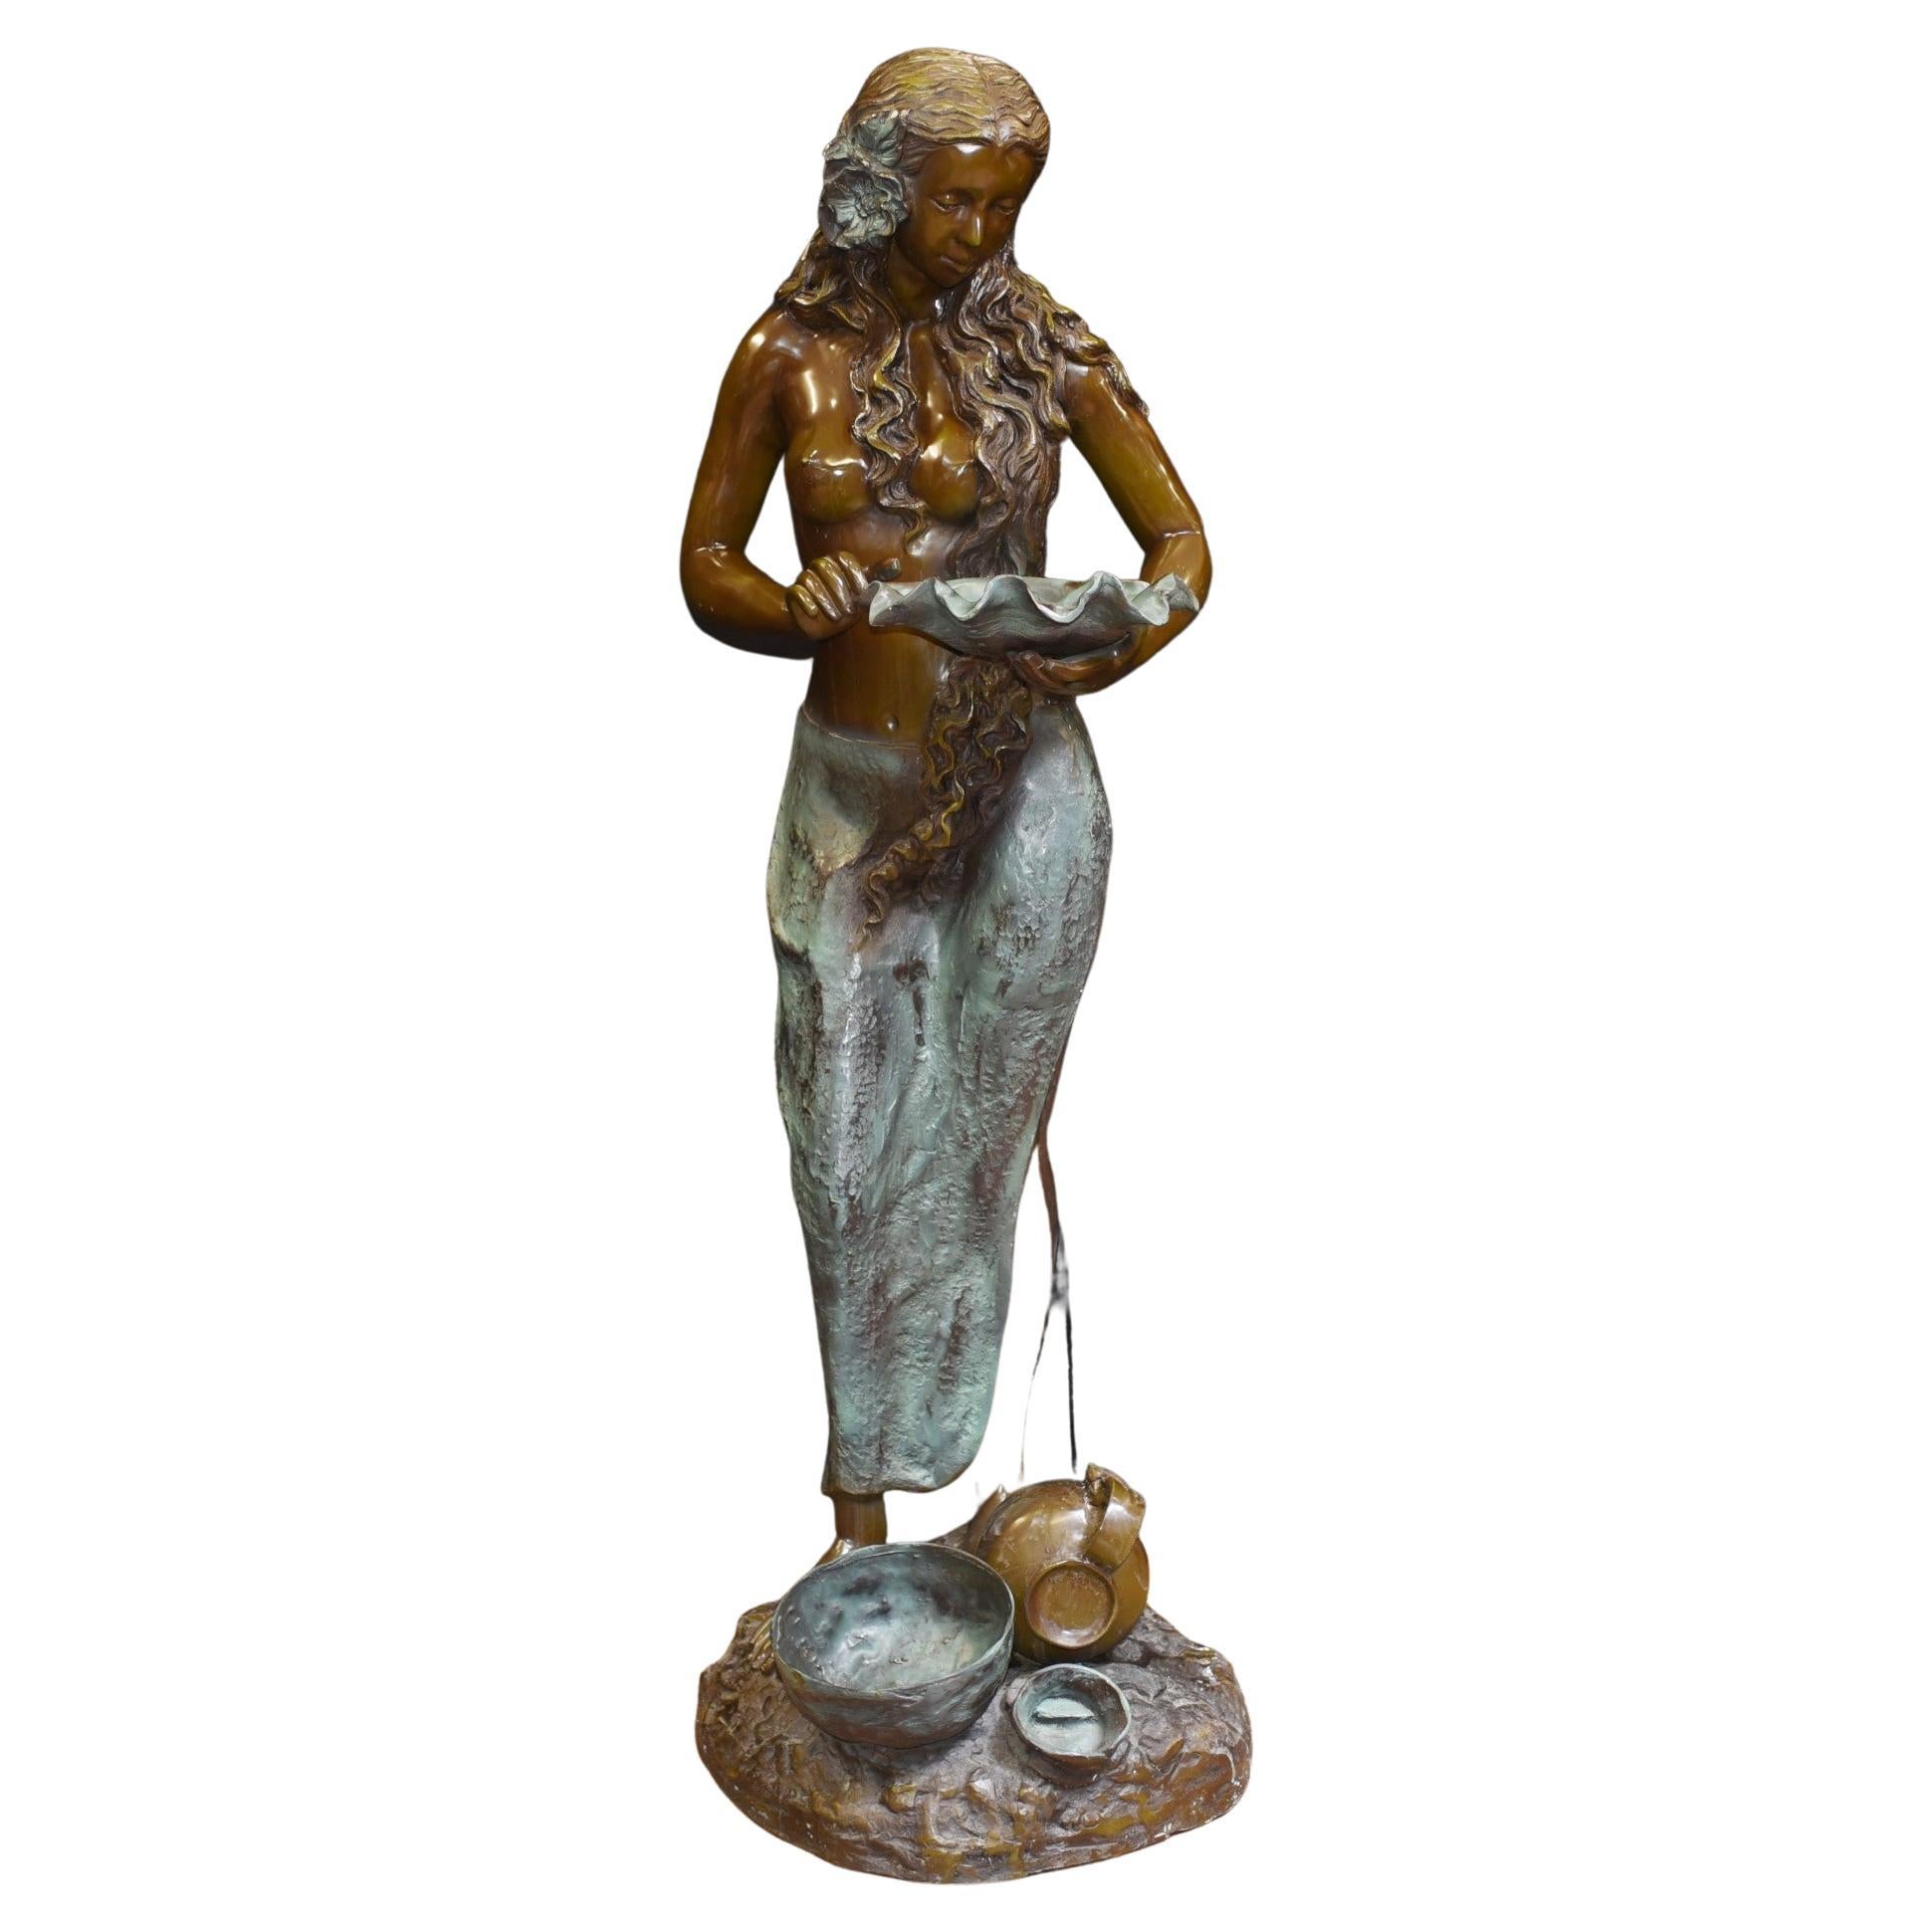 Elegant French bronze garden fountain in the form of a semi nude female
Good size at almost five feet tall - 149 CM
Easy to configure, water inlet is on the bottom at back of base
Imagine this configured with water cascading from the conch shell she